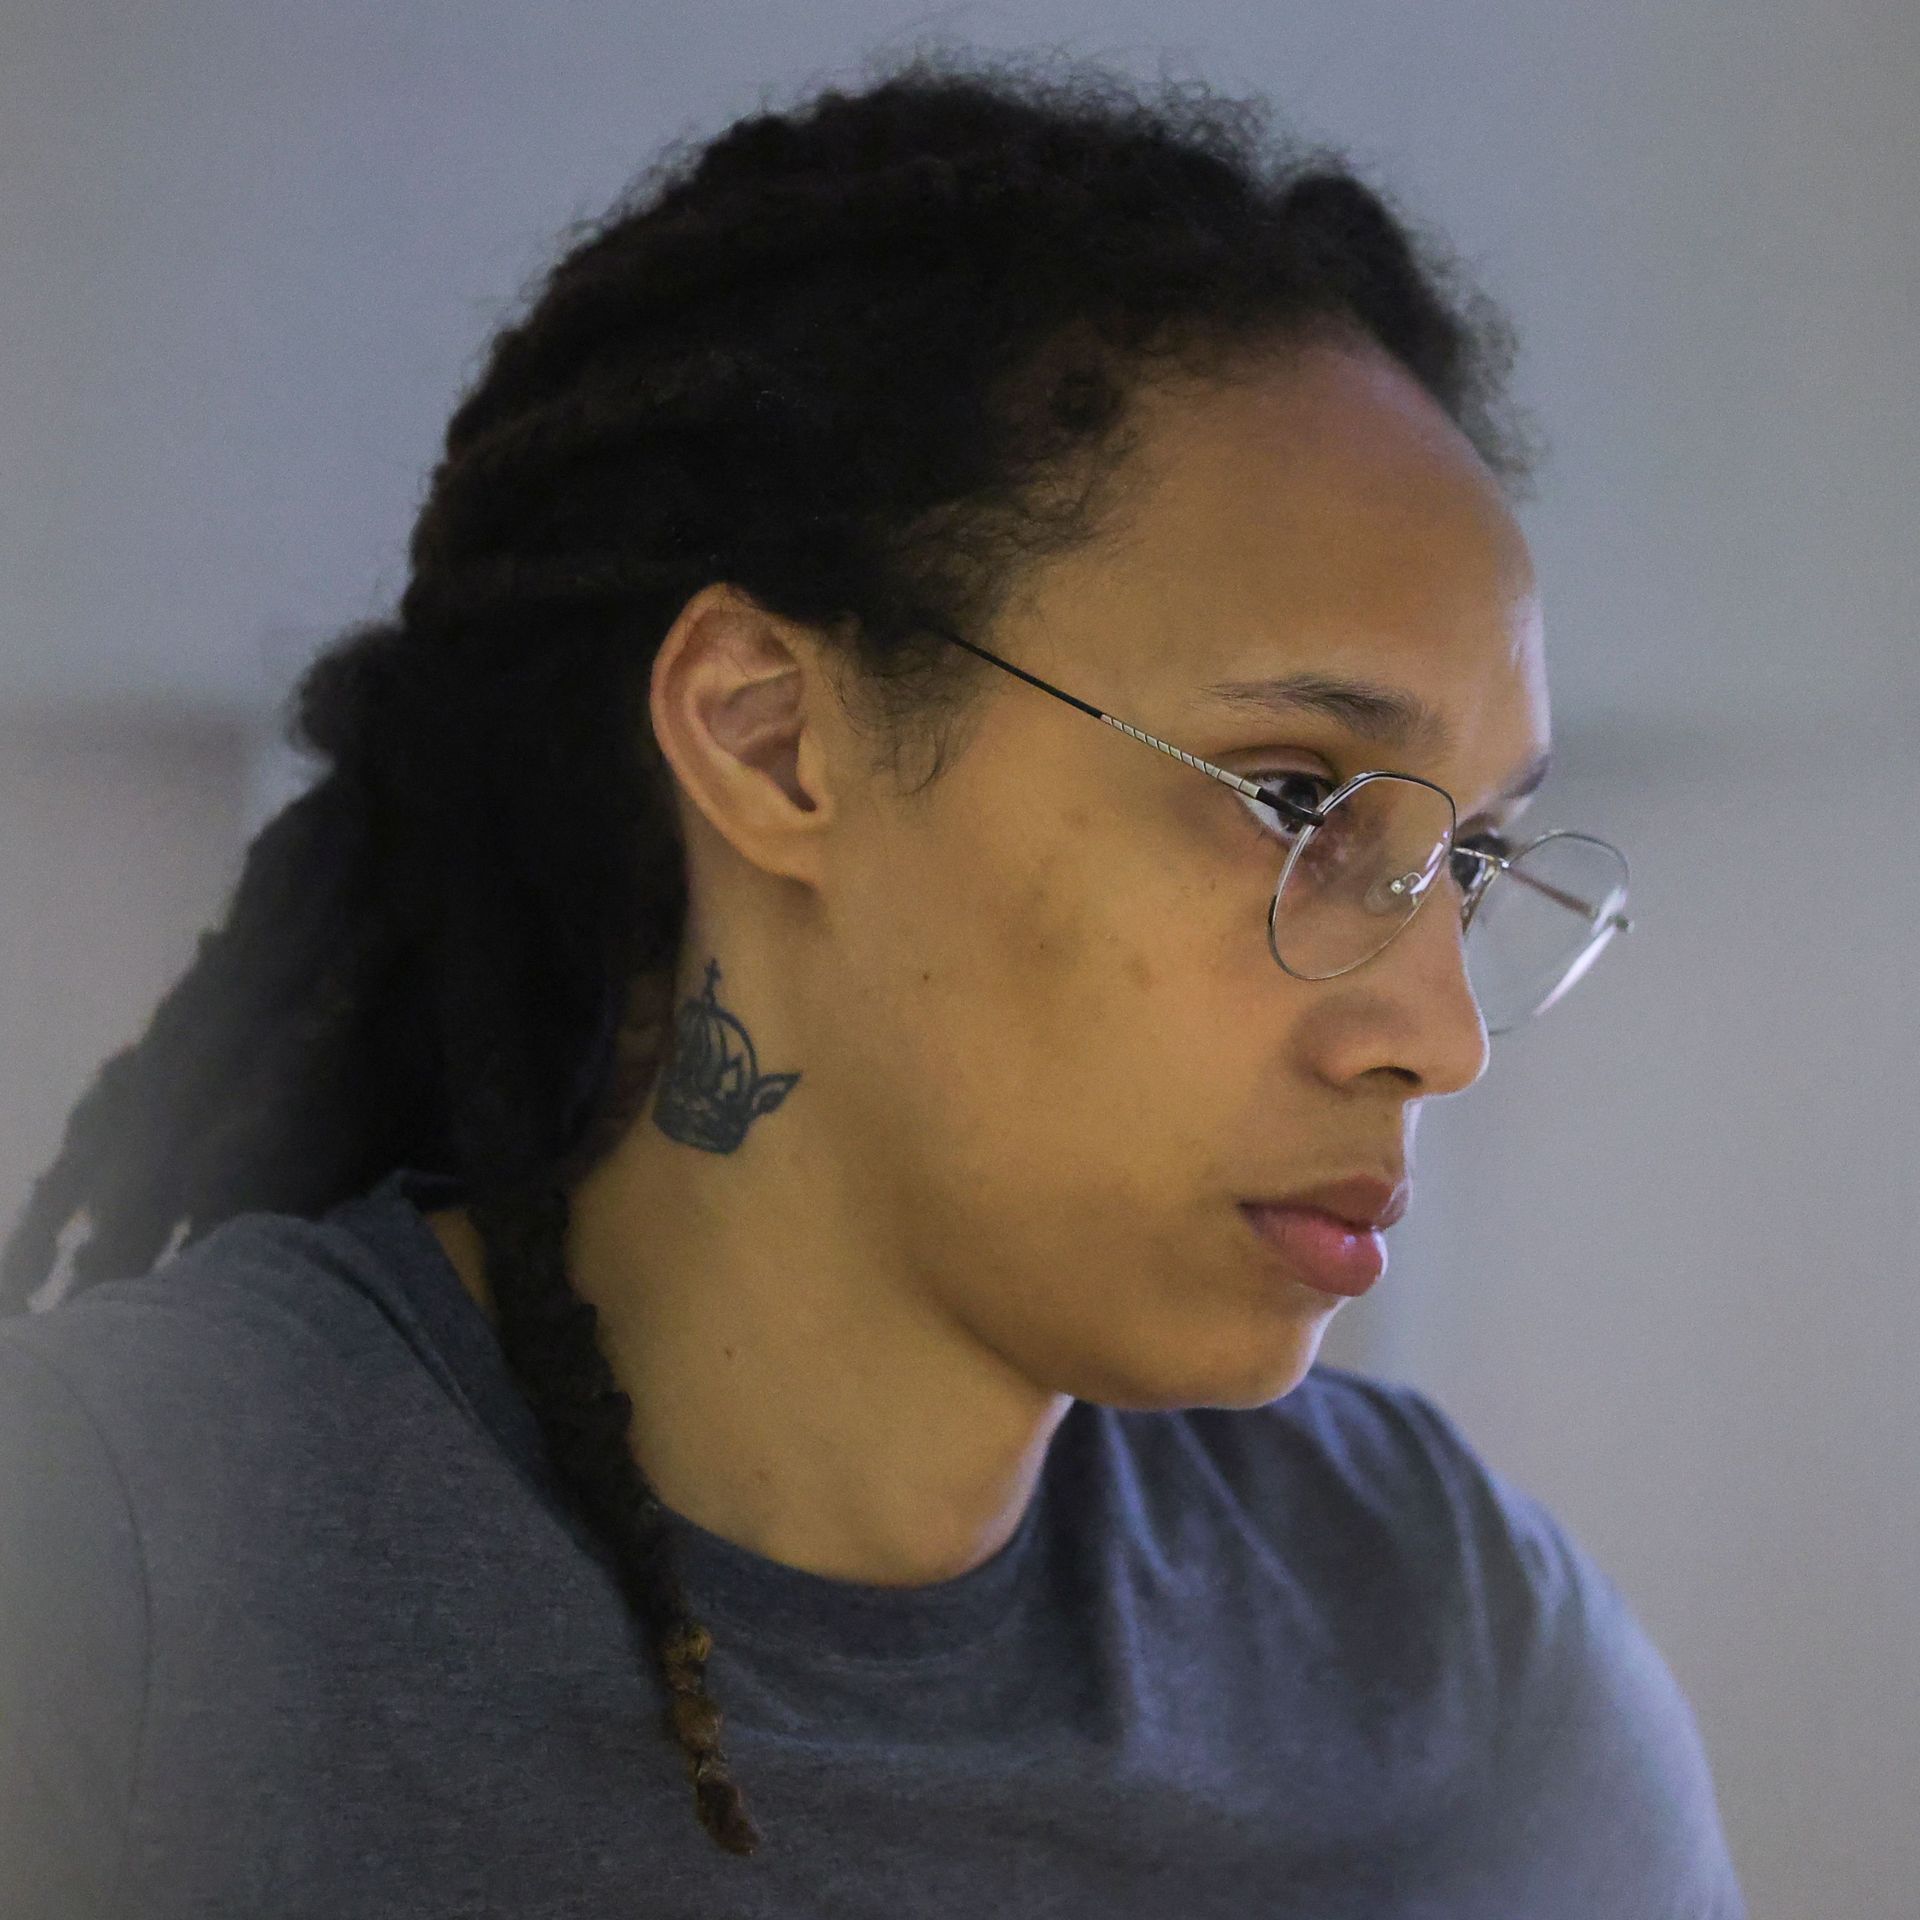 Brittney Griner inside a defendants' cage during a court hearing in Khimki, Russia, on Aug. 4.